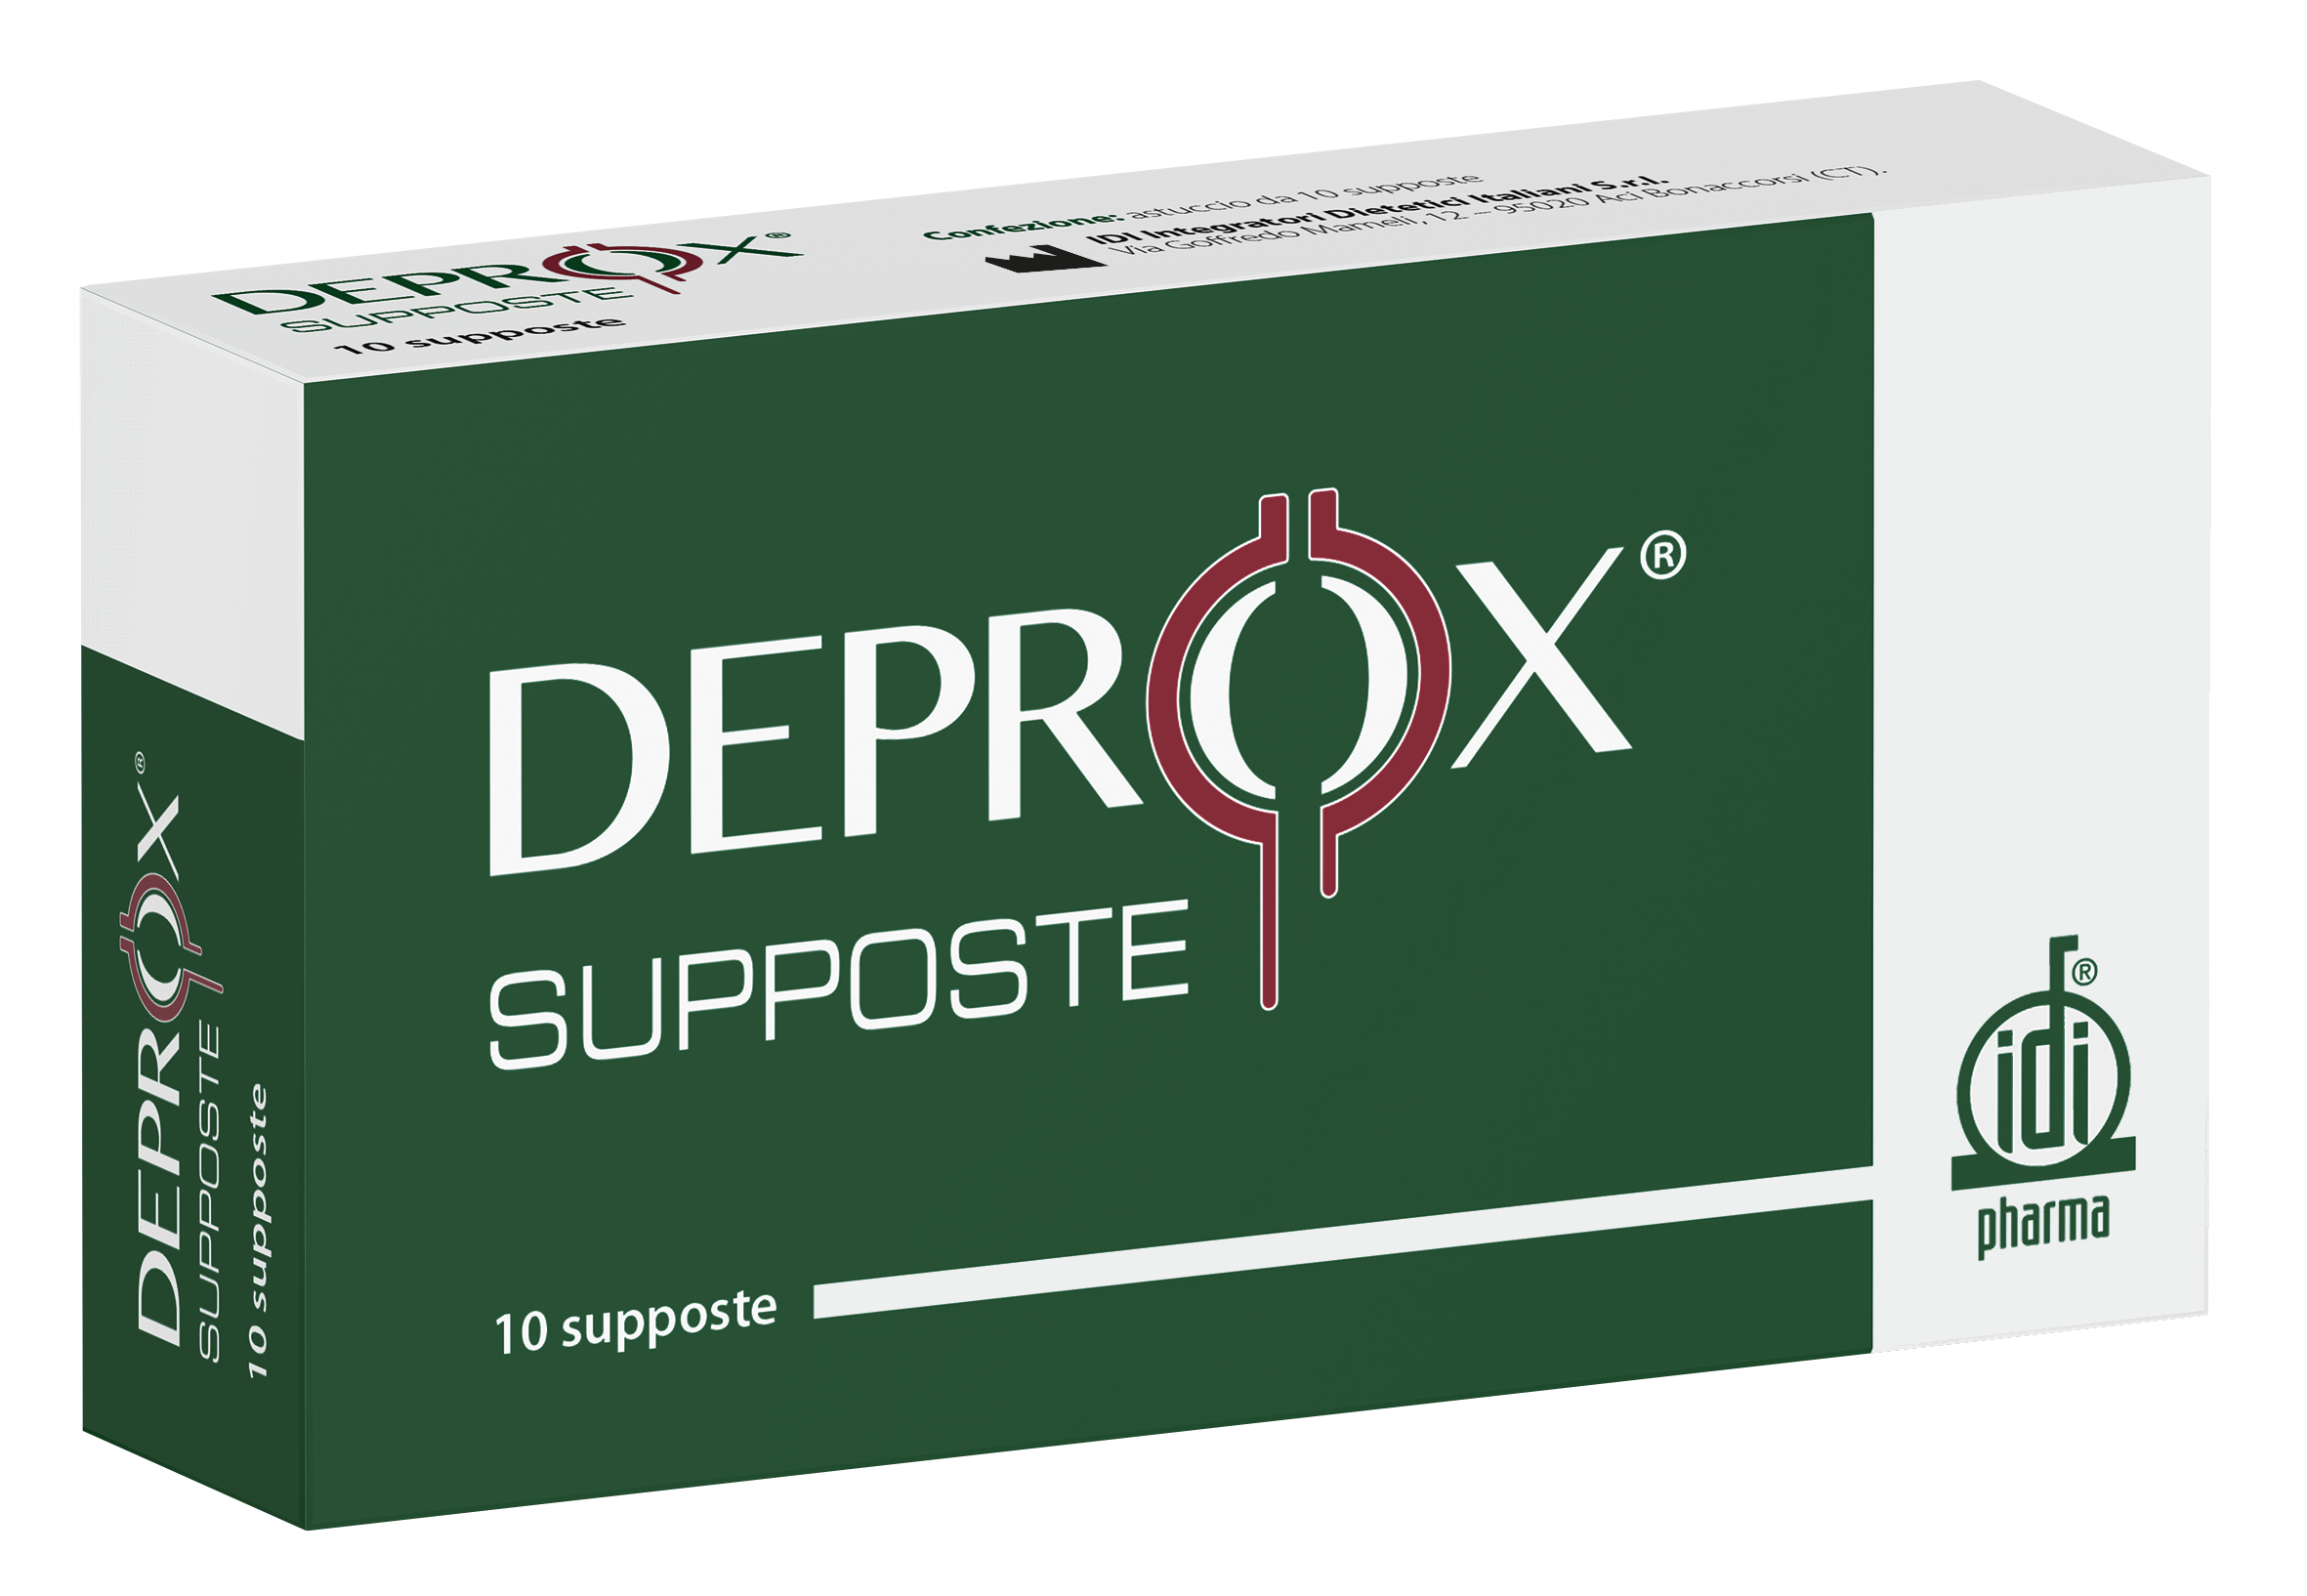 DEPROX suppositories